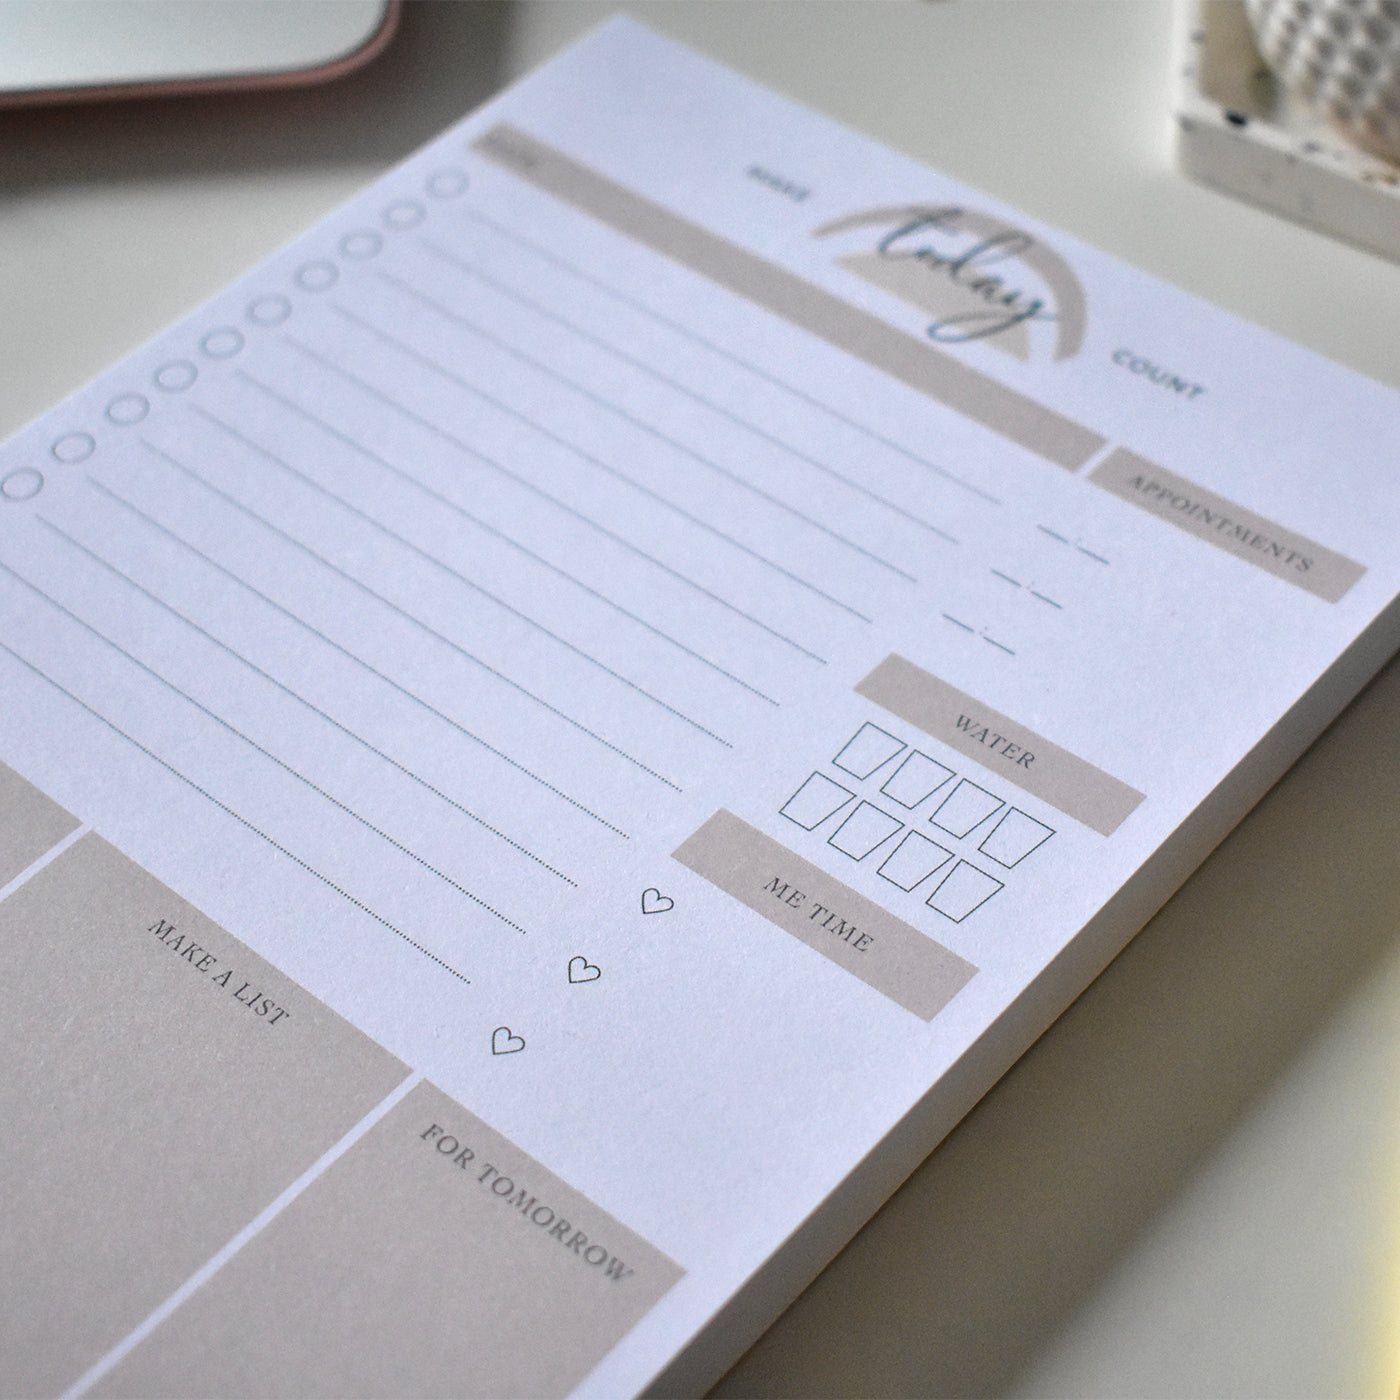 Daily Planner 'Make Today Count'